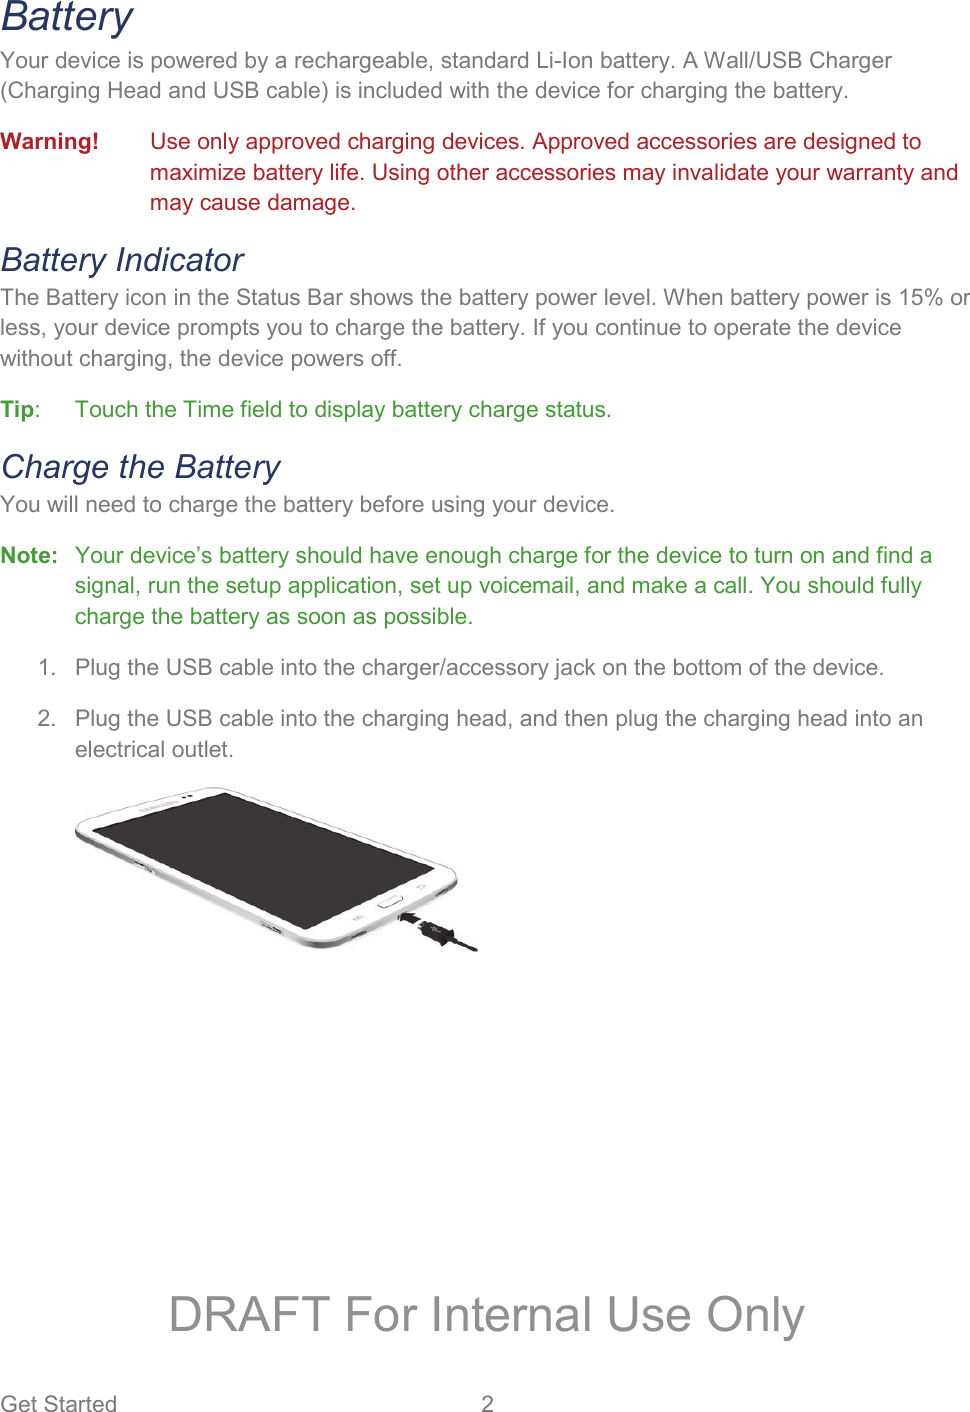 Get Started  2   Battery Your device is powered by a rechargeable, standard Li-Ion battery. A Wall/USB Charger (Charging Head and USB cable) is included with the device for charging the battery. Warning!  Use only approved charging devices. Approved accessories are designed to maximize battery life. Using other accessories may invalidate your warranty and may cause damage. Battery Indicator The Battery icon in the Status Bar shows the battery power level. When battery power is 15% or less, your device prompts you to charge the battery. If you continue to operate the device without charging, the device powers off.  Tip:  Touch the Time field to display battery charge status. Charge the Battery You will need to charge the battery before using your device.  Note:  Your device’s battery should have enough charge for the device to turn on and find a signal, run the setup application, set up voicemail, and make a call. You should fully charge the battery as soon as possible.   Plug the USB cable into the charger/accessory jack on the bottom of the device. 1.  Plug the USB cable into the charging head, and then plug the charging head into an 2.electrical outlet.   DRAFT For Internal Use Only